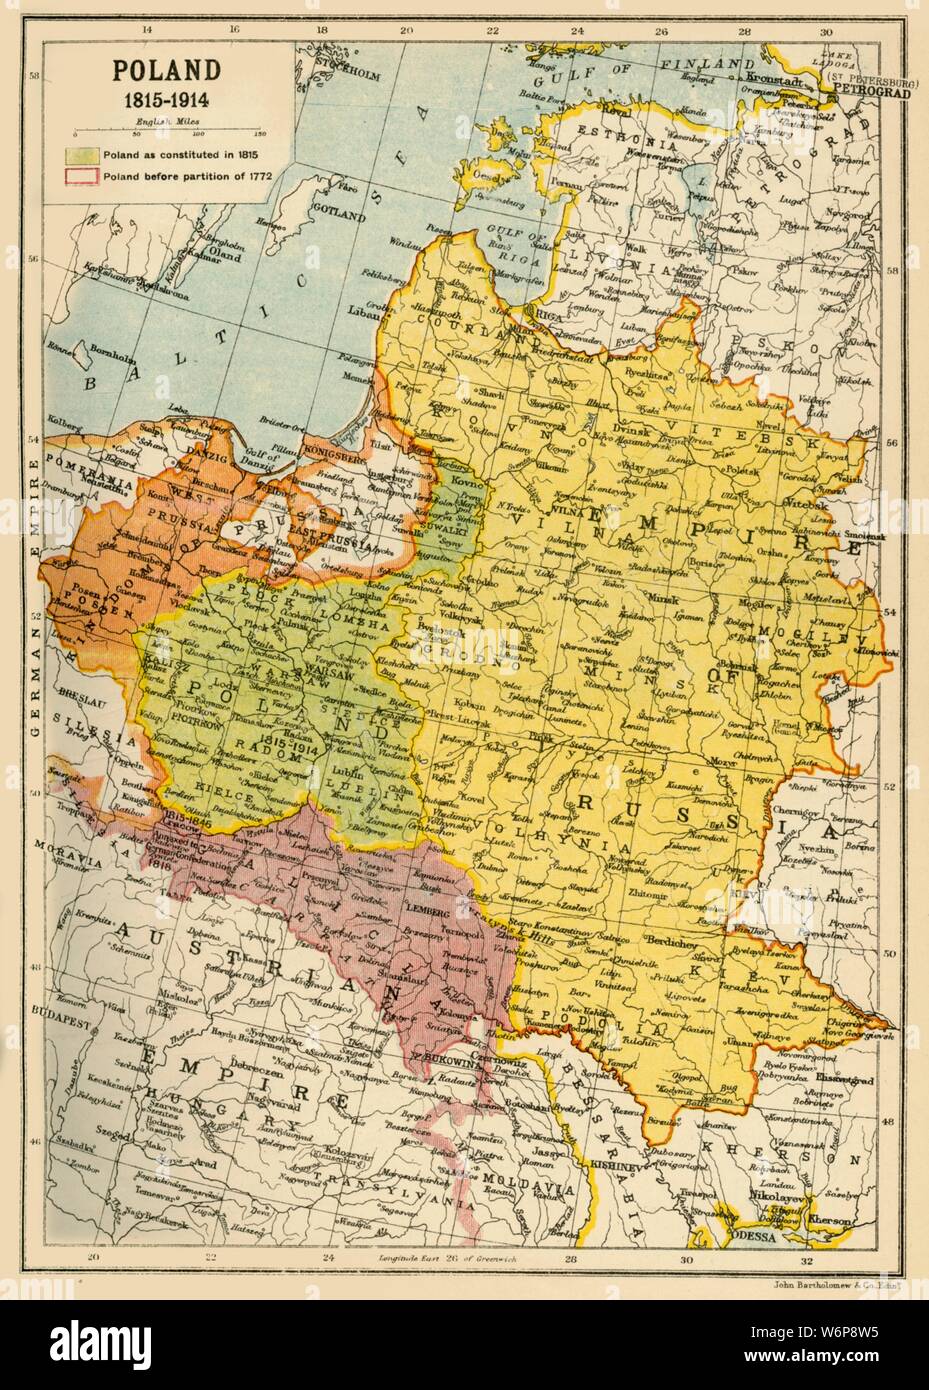 'Poland, 1815-1914', (c1920). Map showing Polish territory from the end of the 18th century until the First World War: 'Poland as constituted in 1815', and 'Poland before partition of 1772'. From &quot;The Great World War - A History&quot; Volume IV, edited by Frank A Mumby. [The Gresham Publishing Company Ltd, London, c1920] Stock Photo